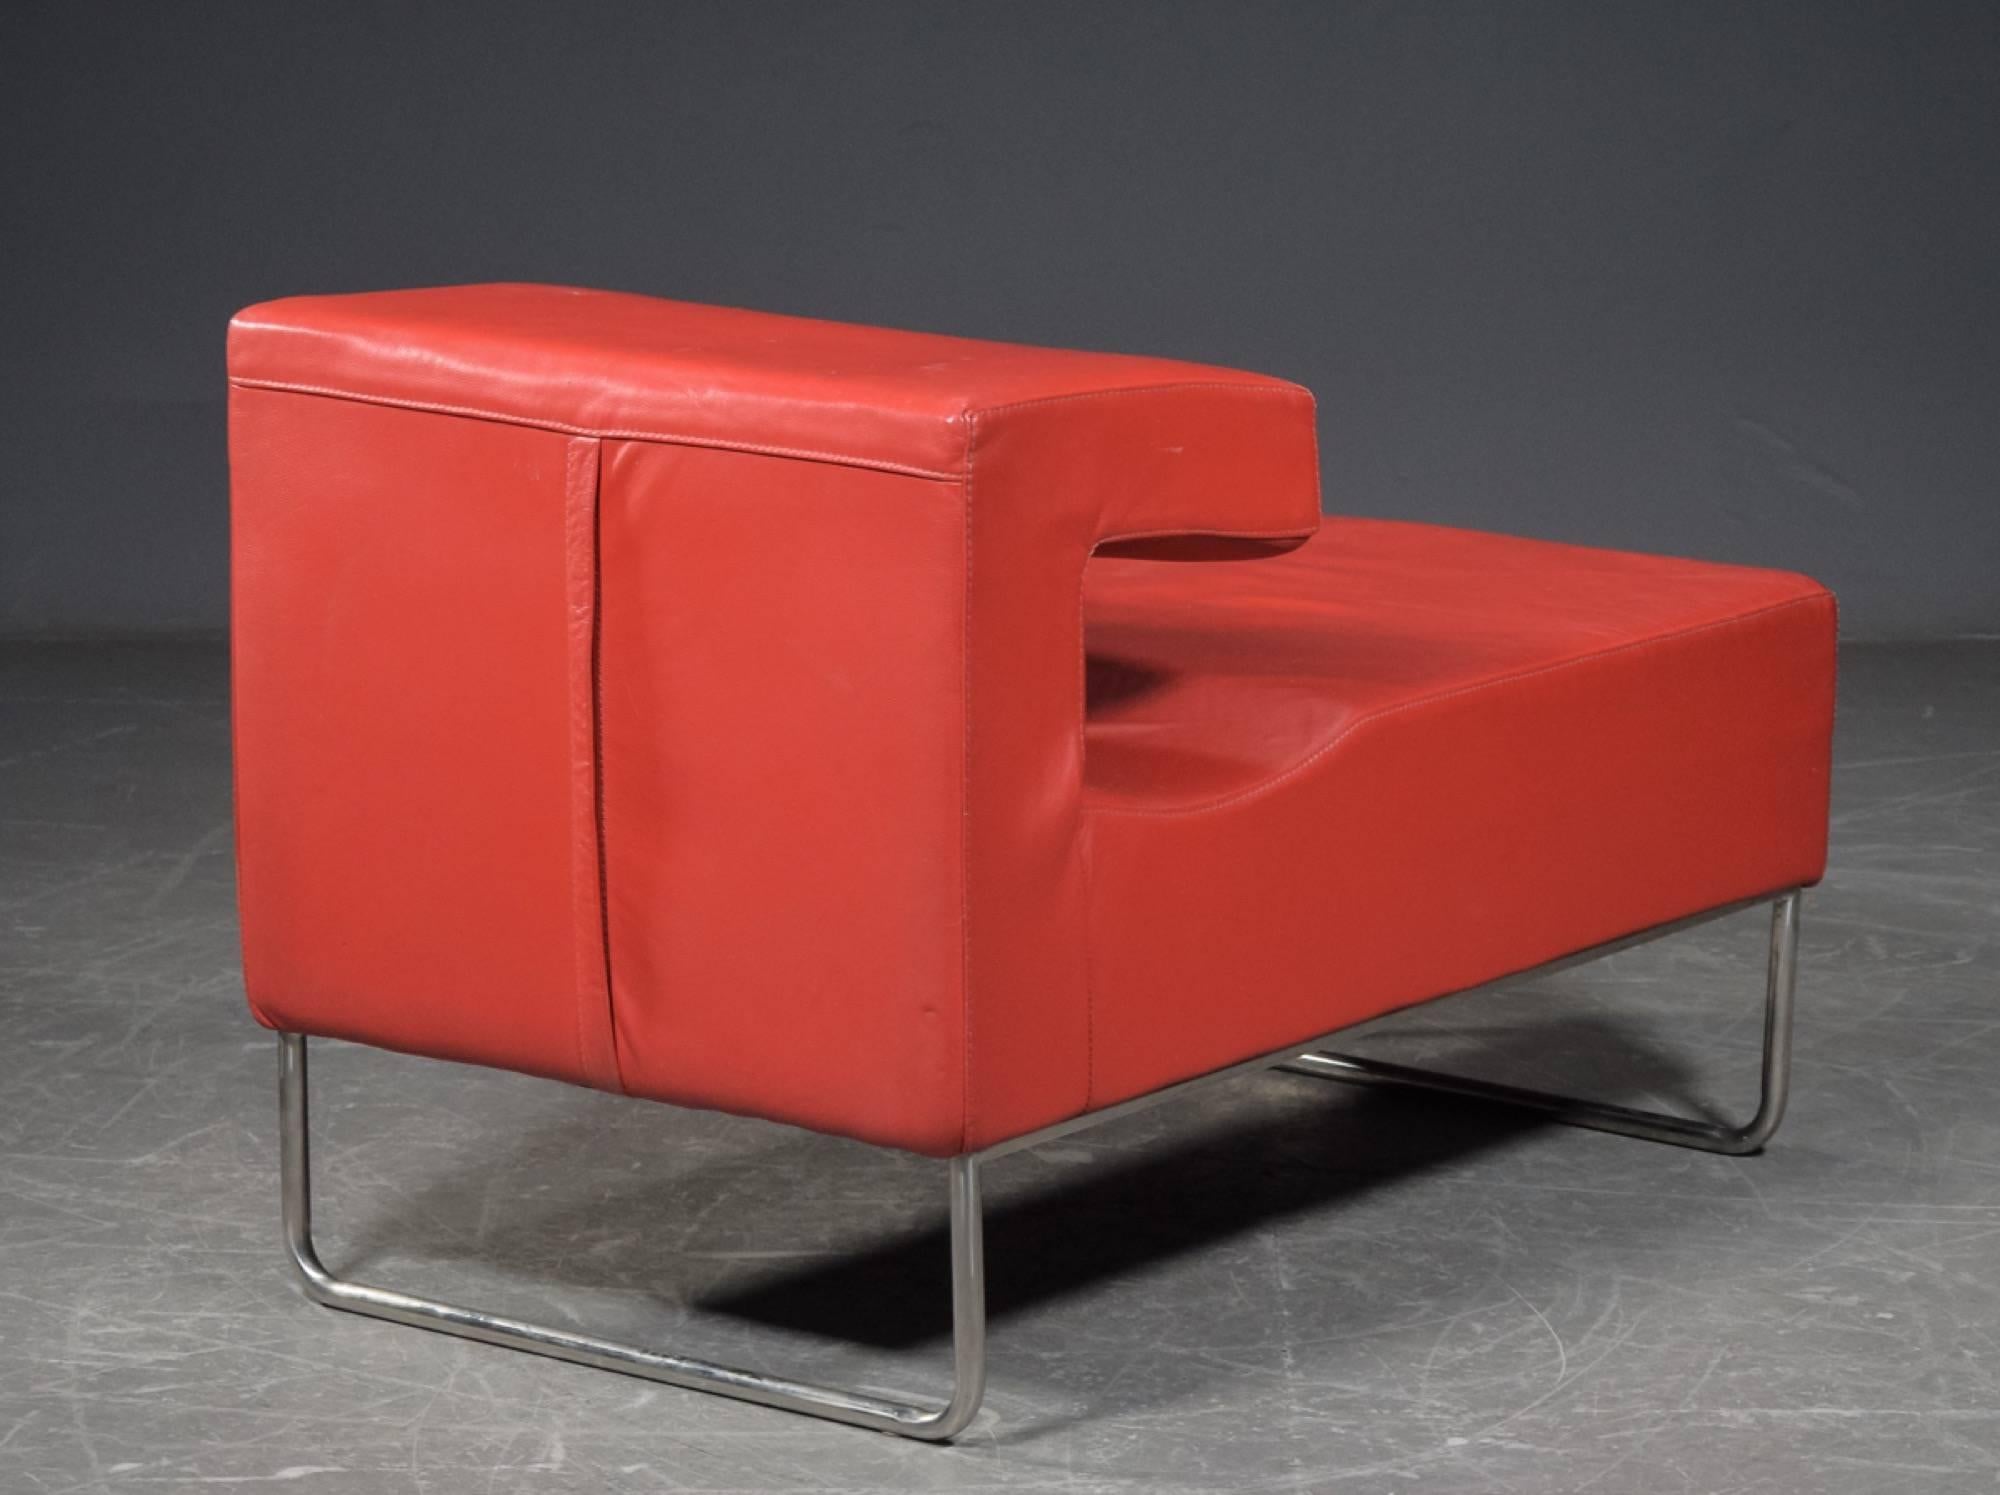 red leather chaise lounge chair